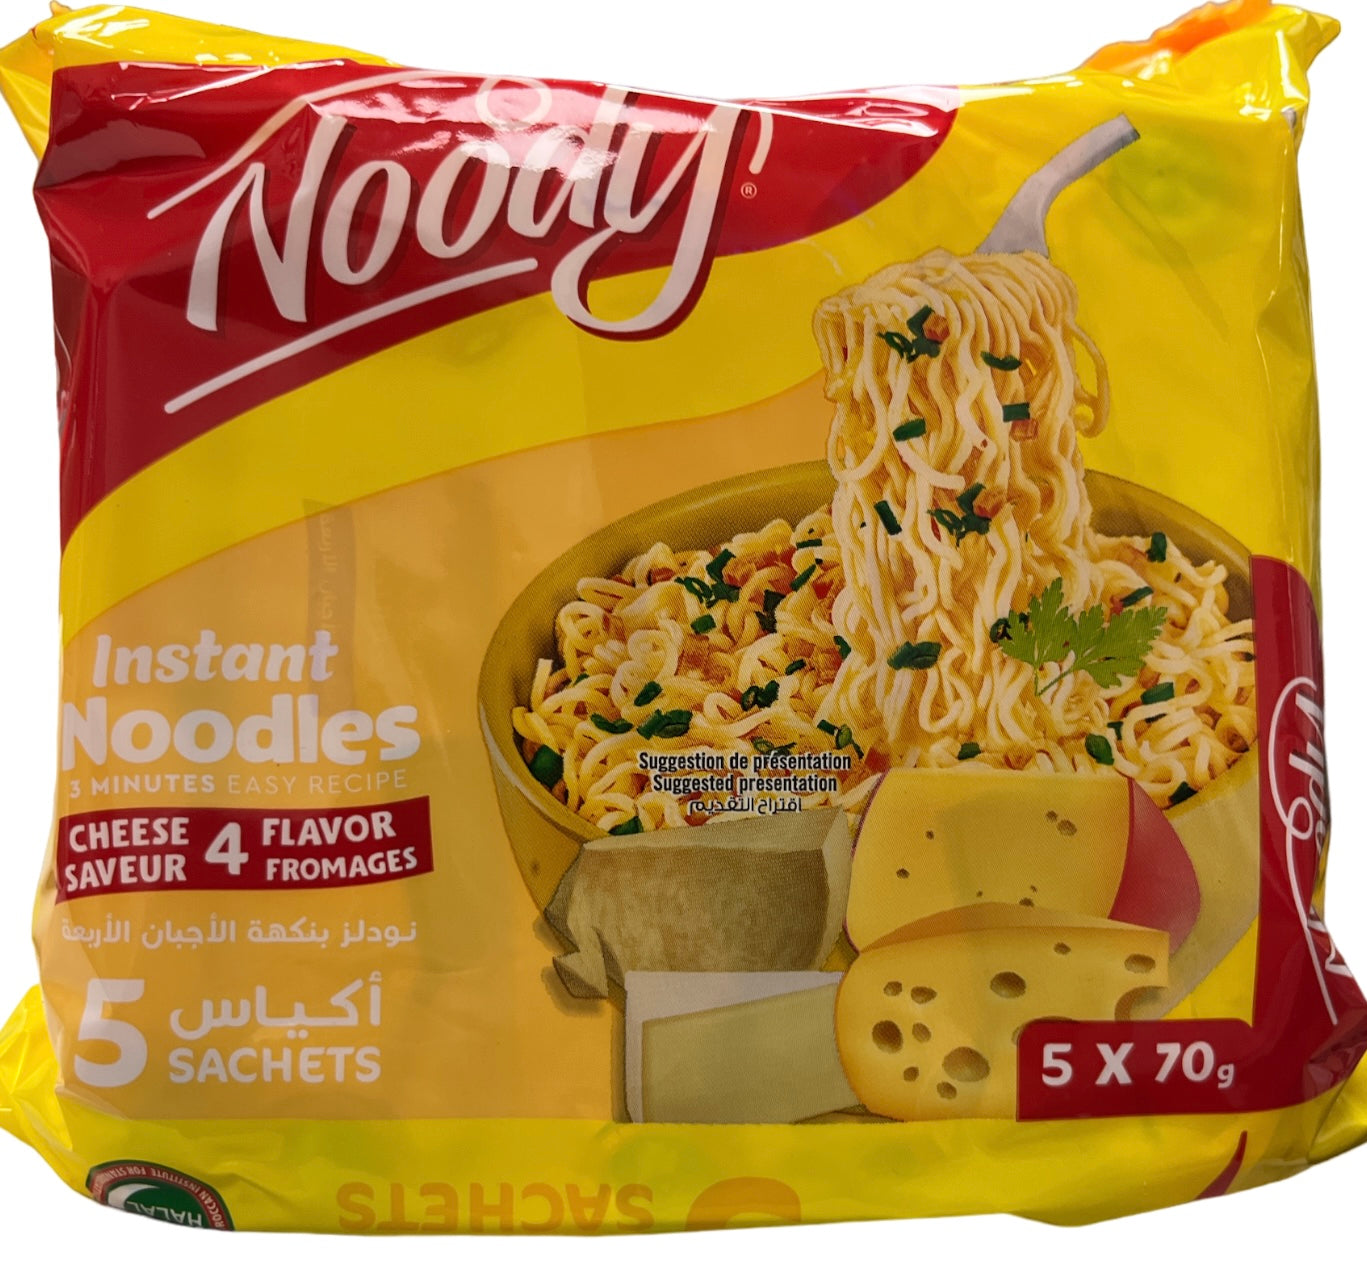 Noody Halal Instant Noodles 4 Cheeses   5x70g